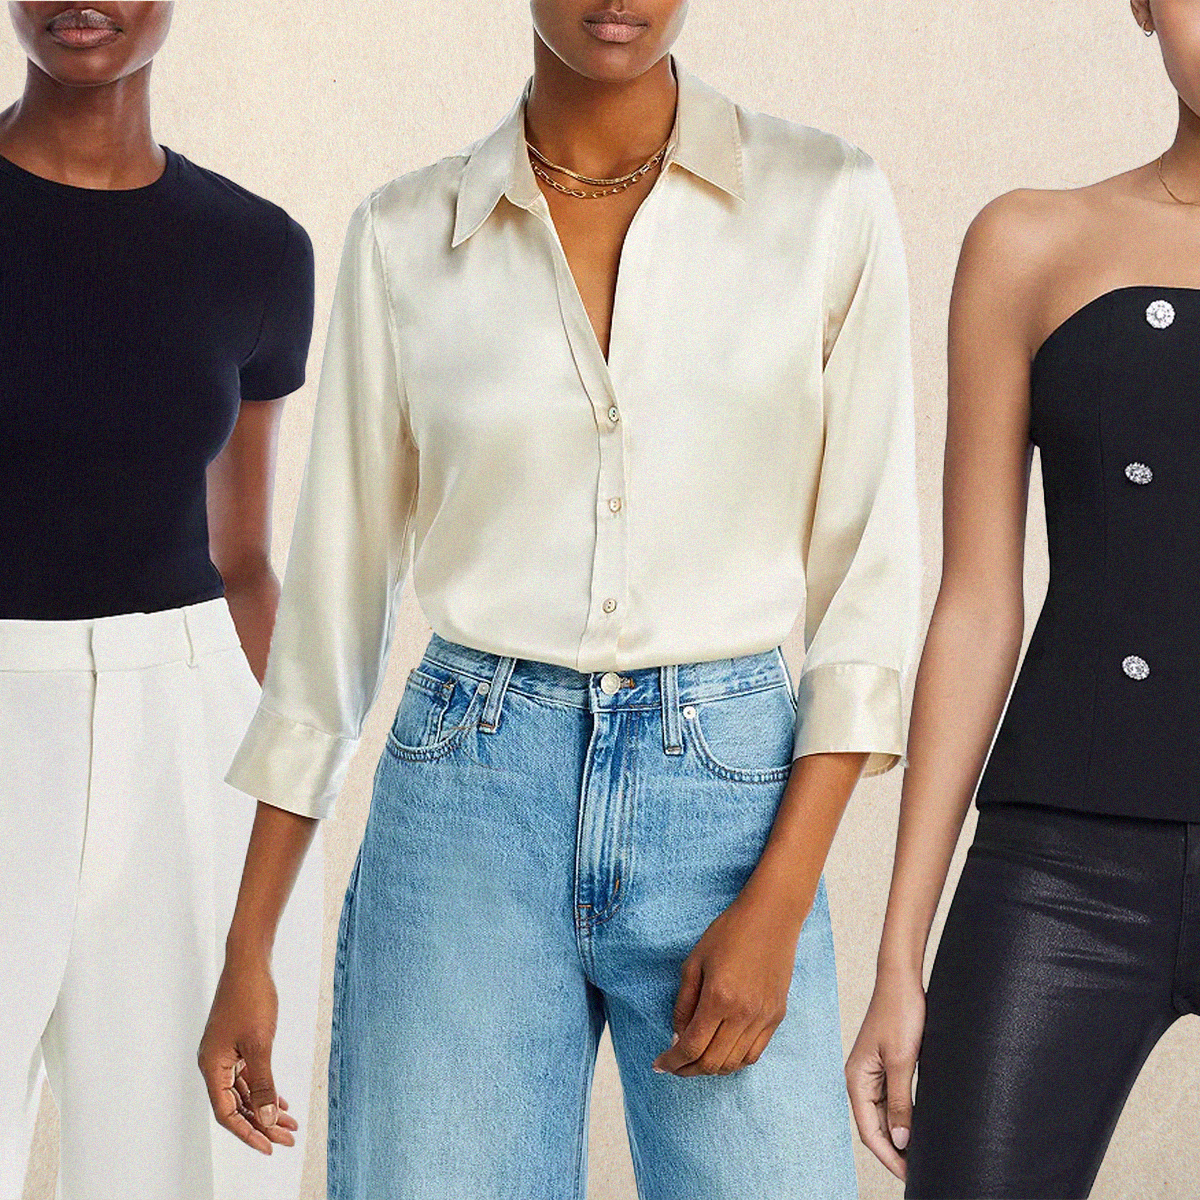 If You Love Elevated Basics, You Won't Regret These 18 Pieces